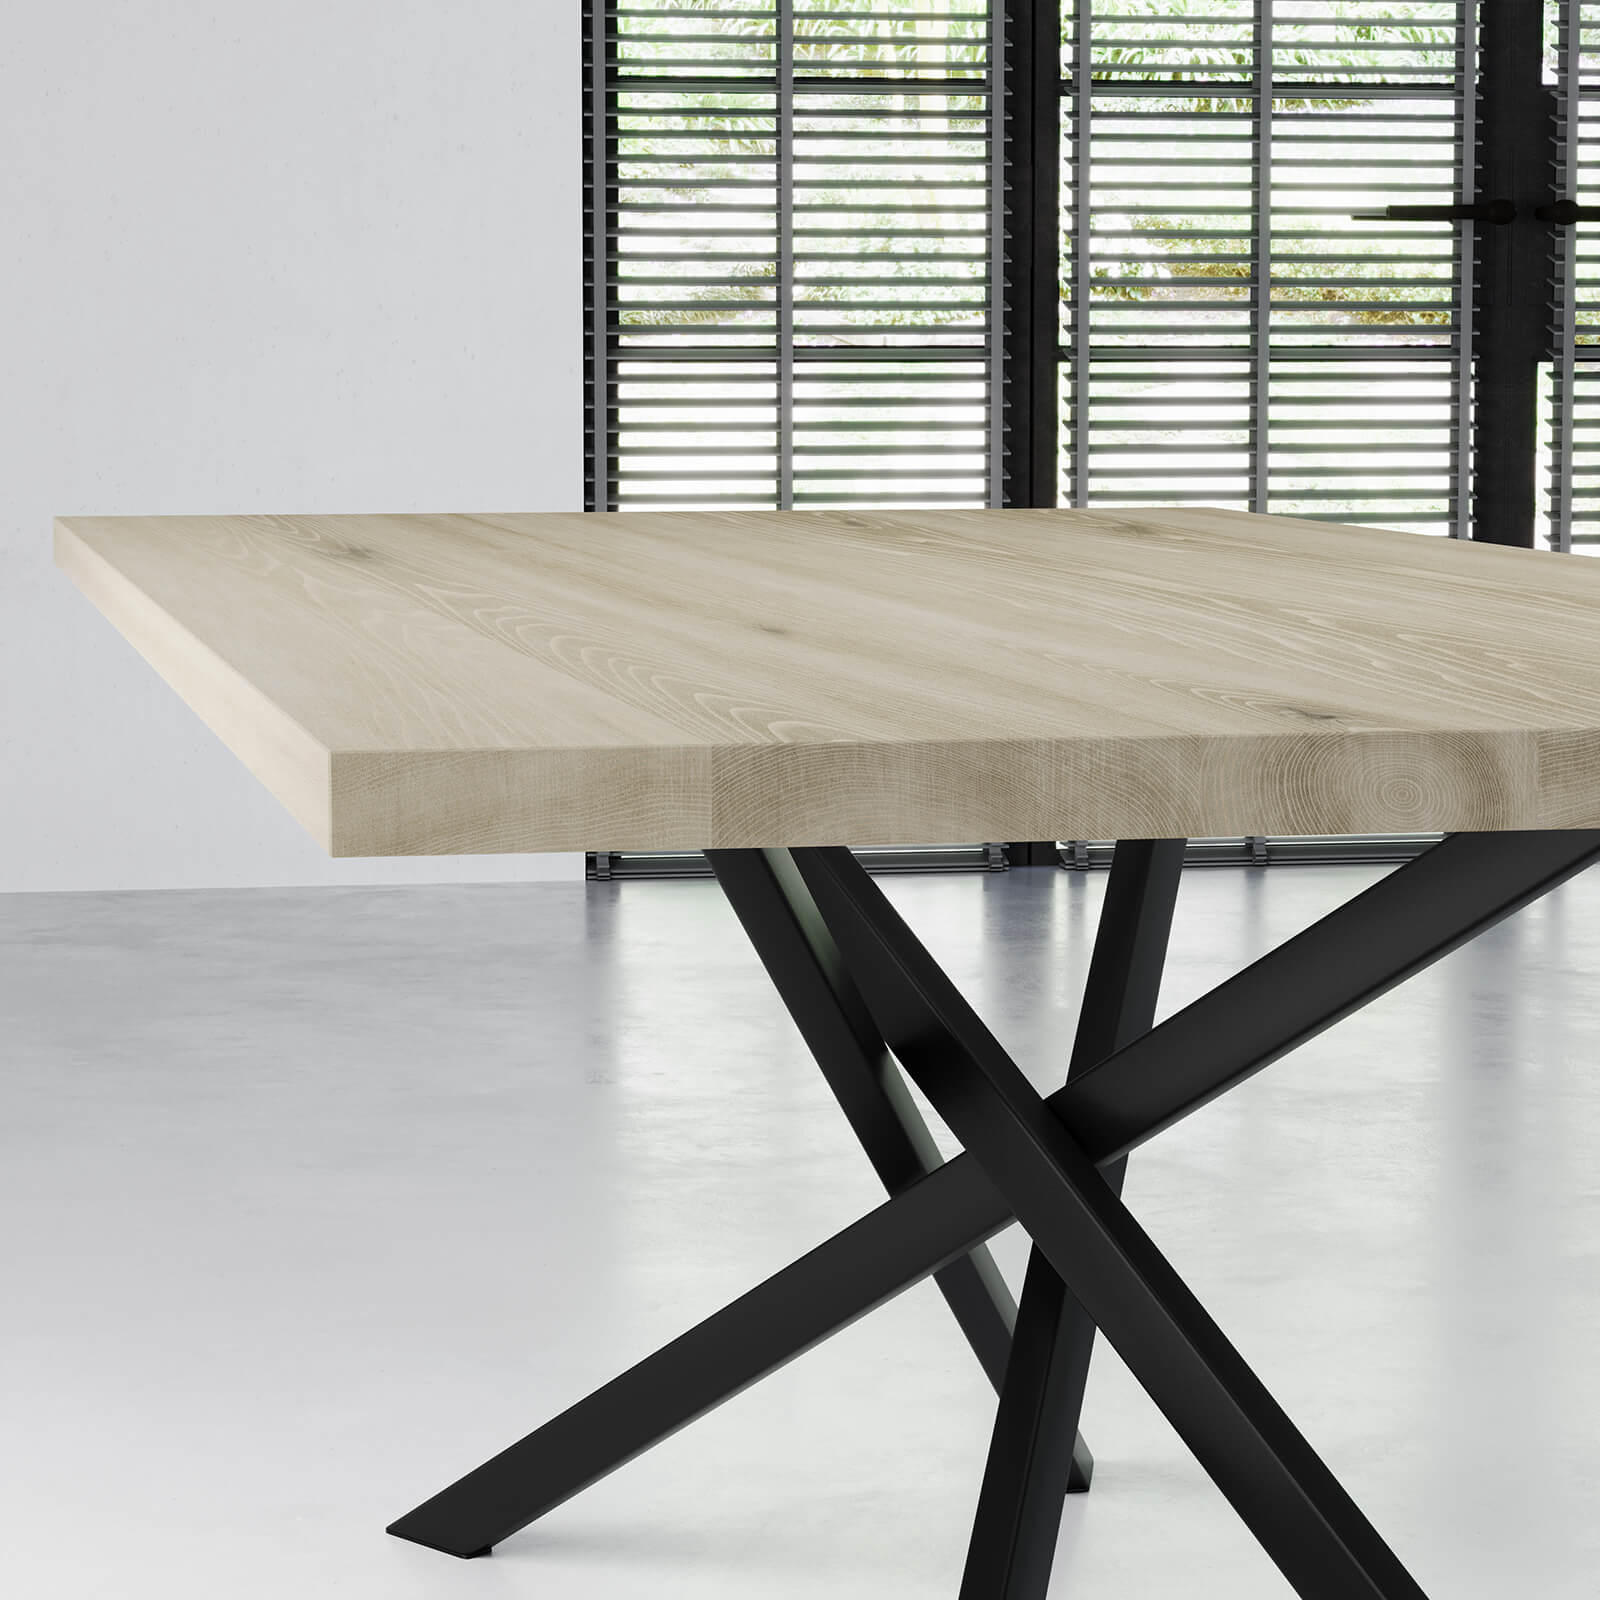 Off-White Table Close-Up 3D Rendering